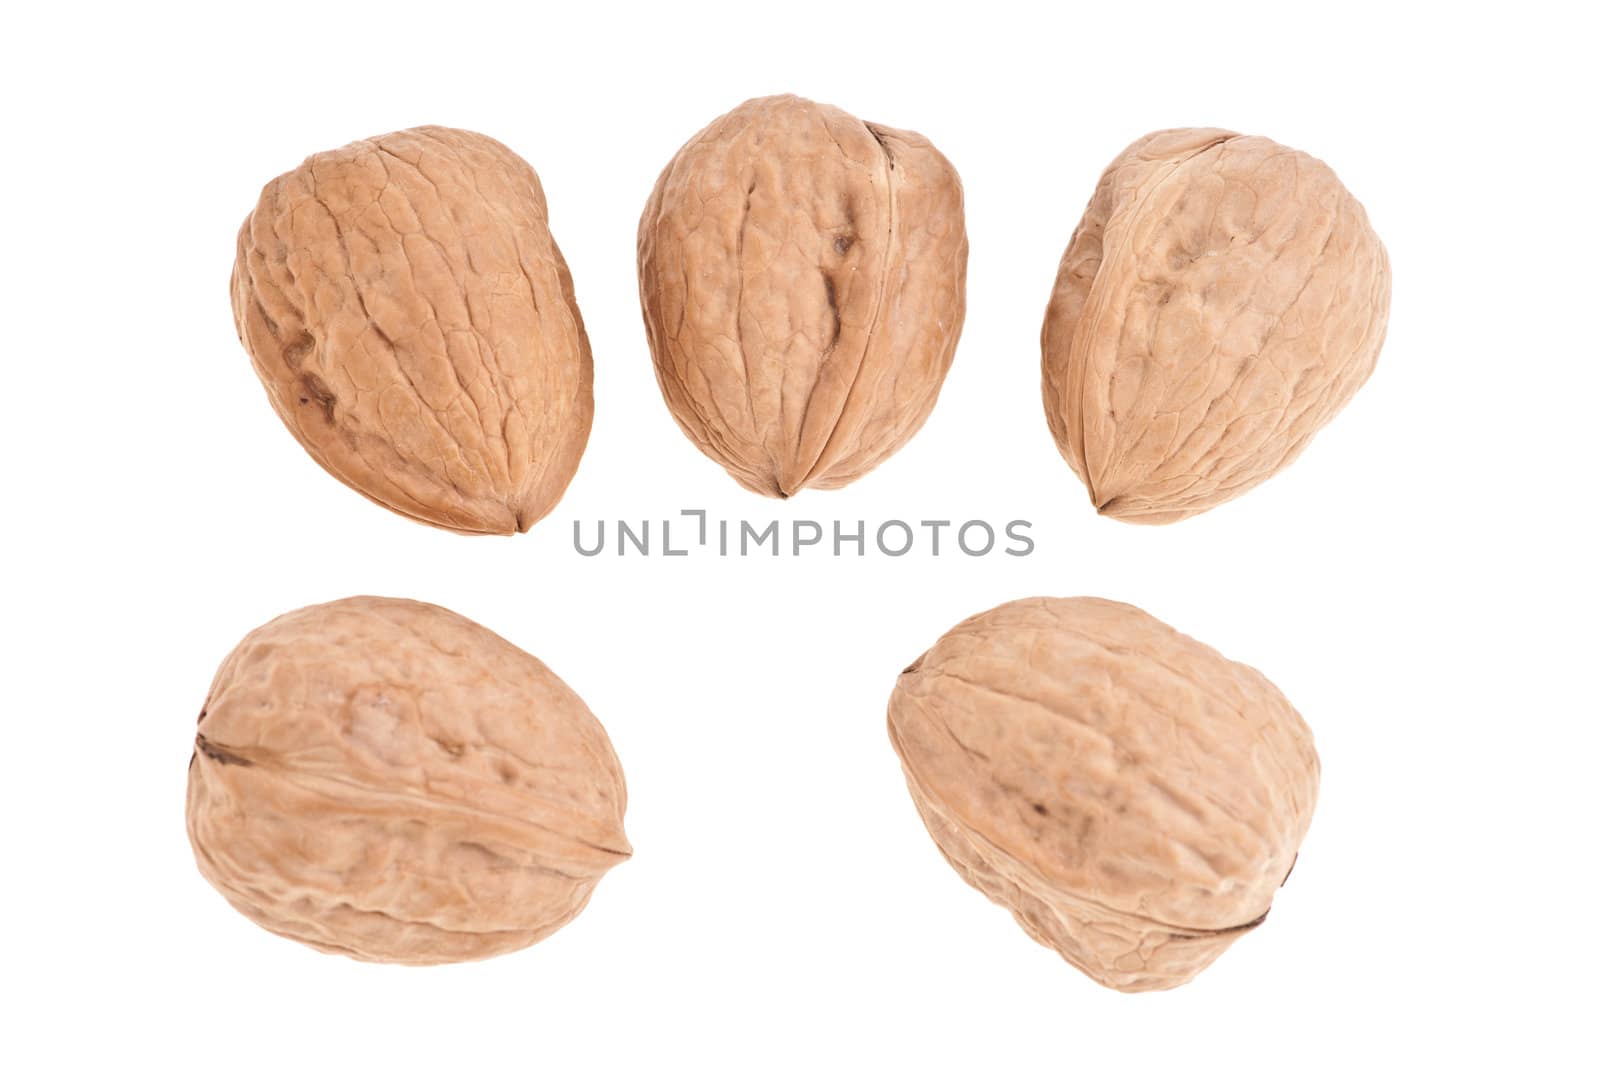 five Walnuts image on white background
